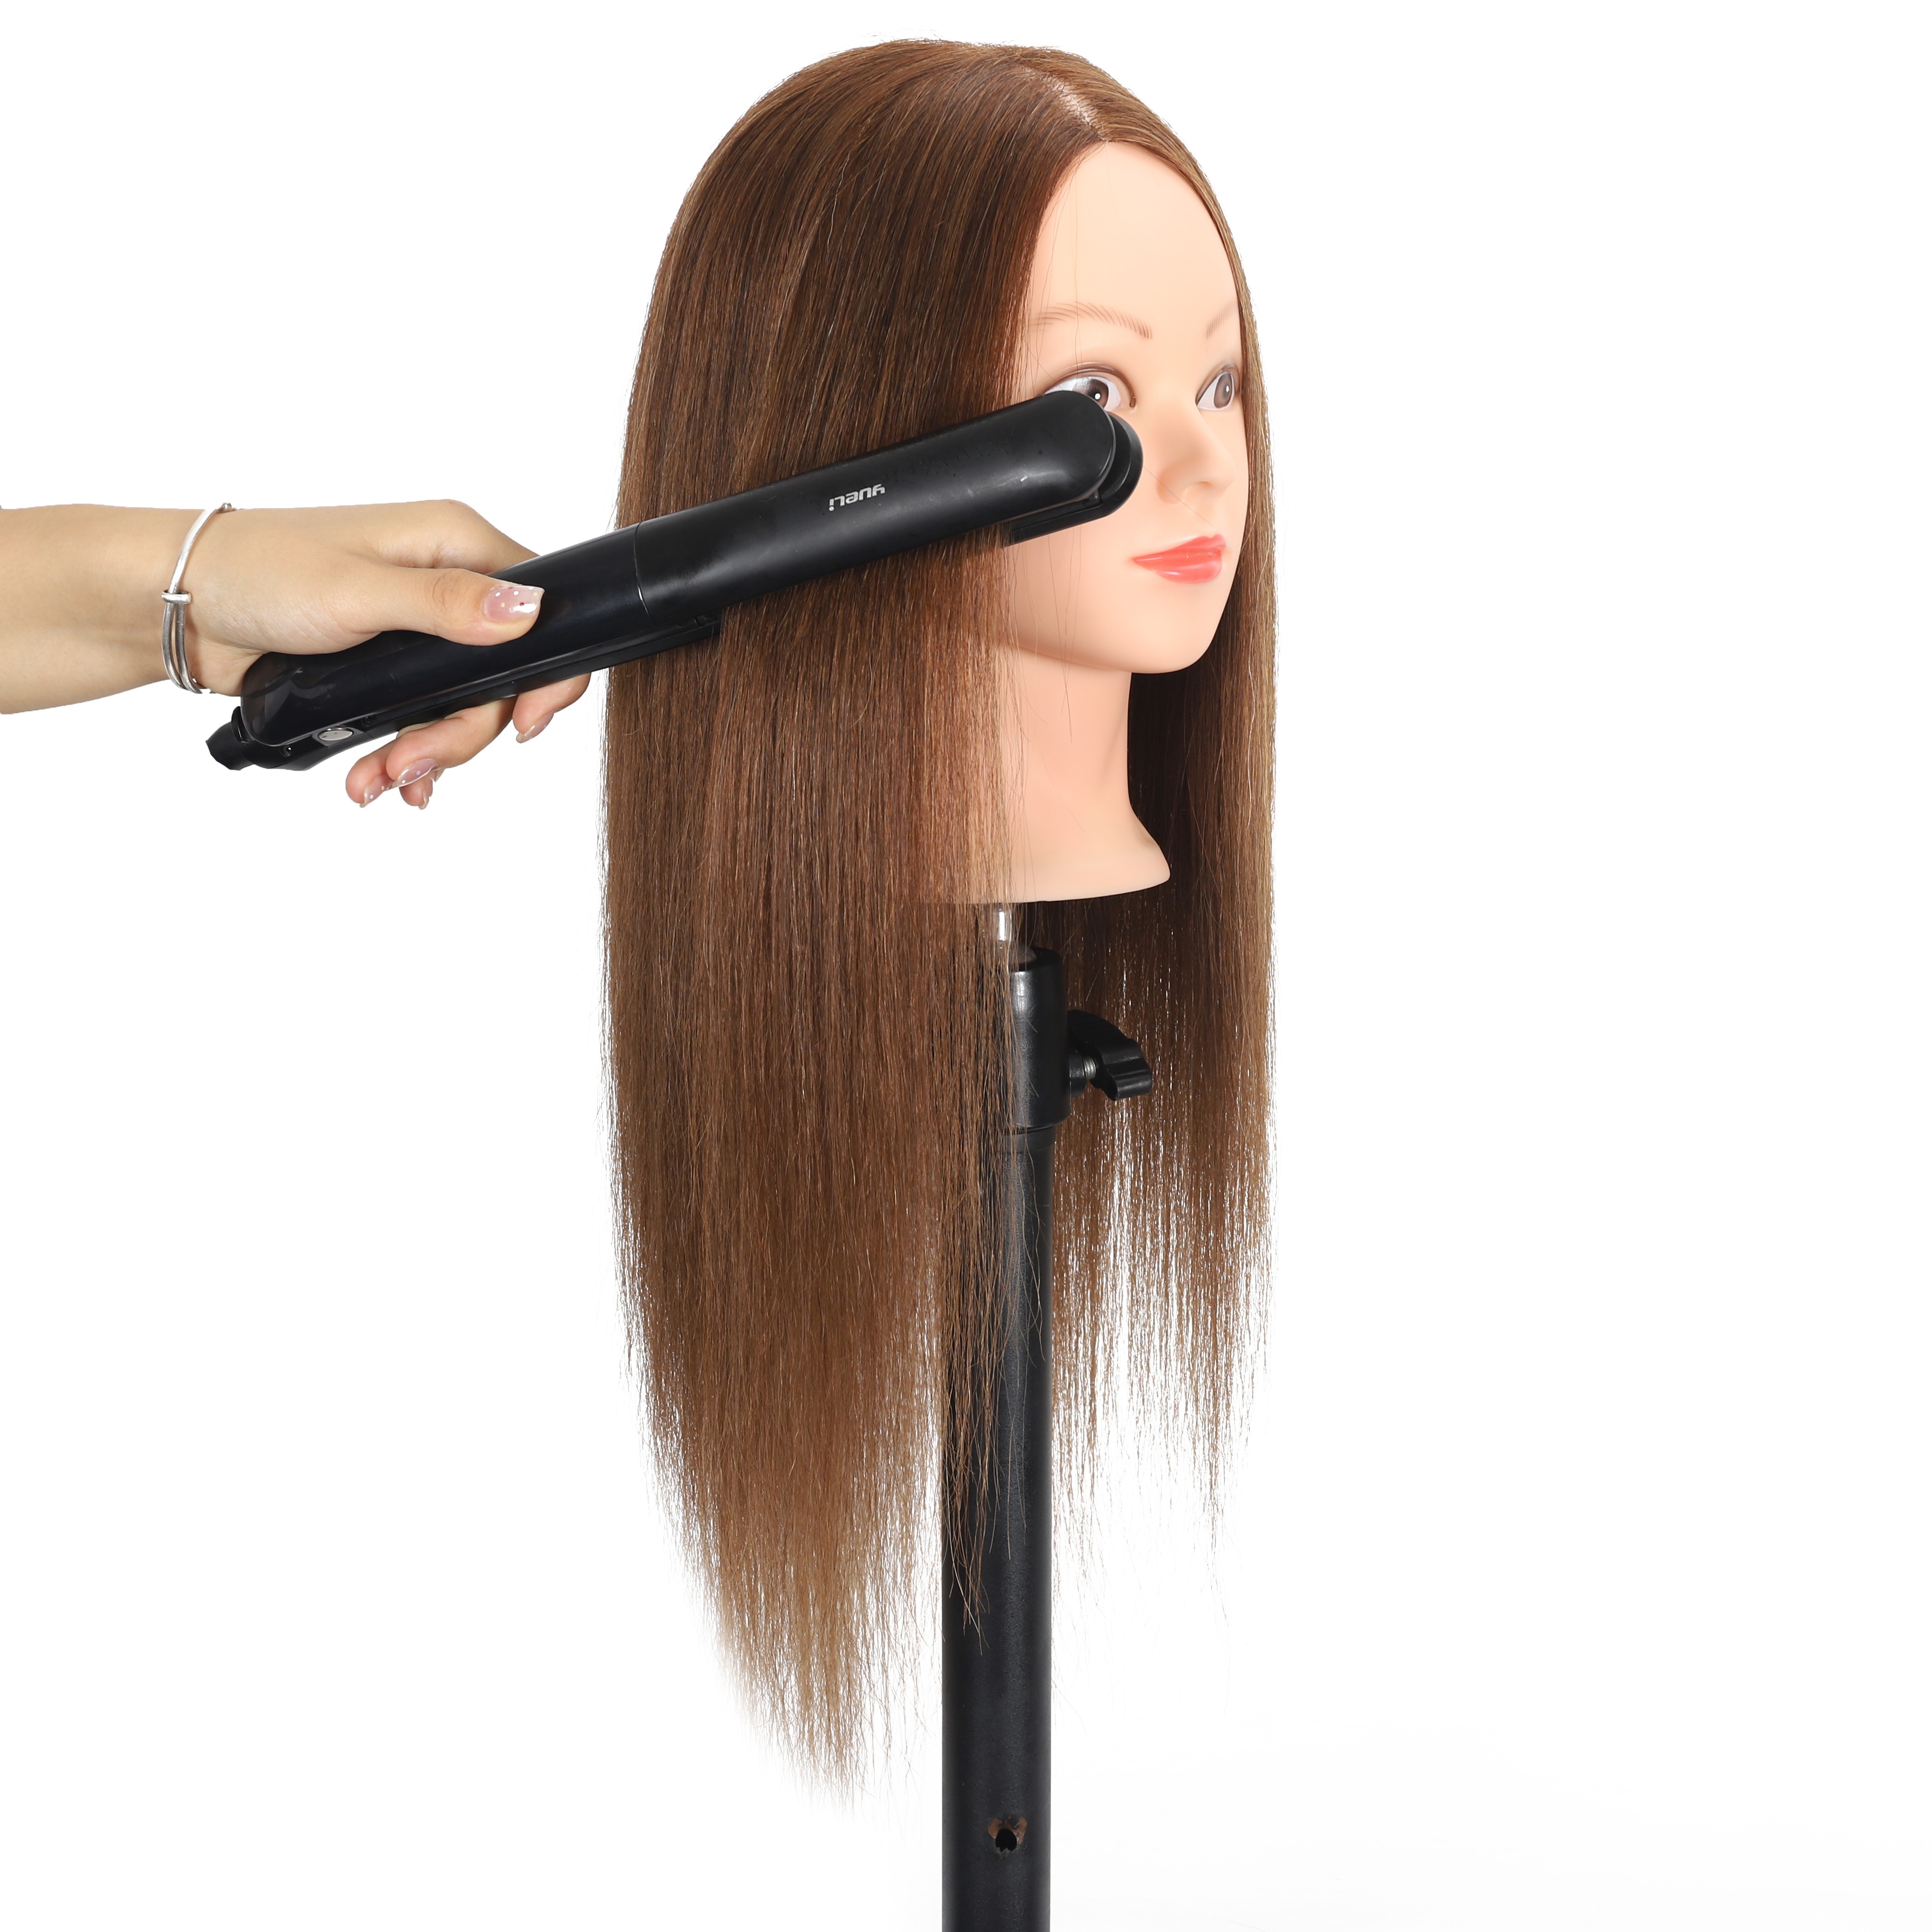 Mannequin Head with Human Hair 100% Real Hair Manikin Cosmetology Doll Head Hairdresser Practice Styling Training Head with Free Clamp Holder (16